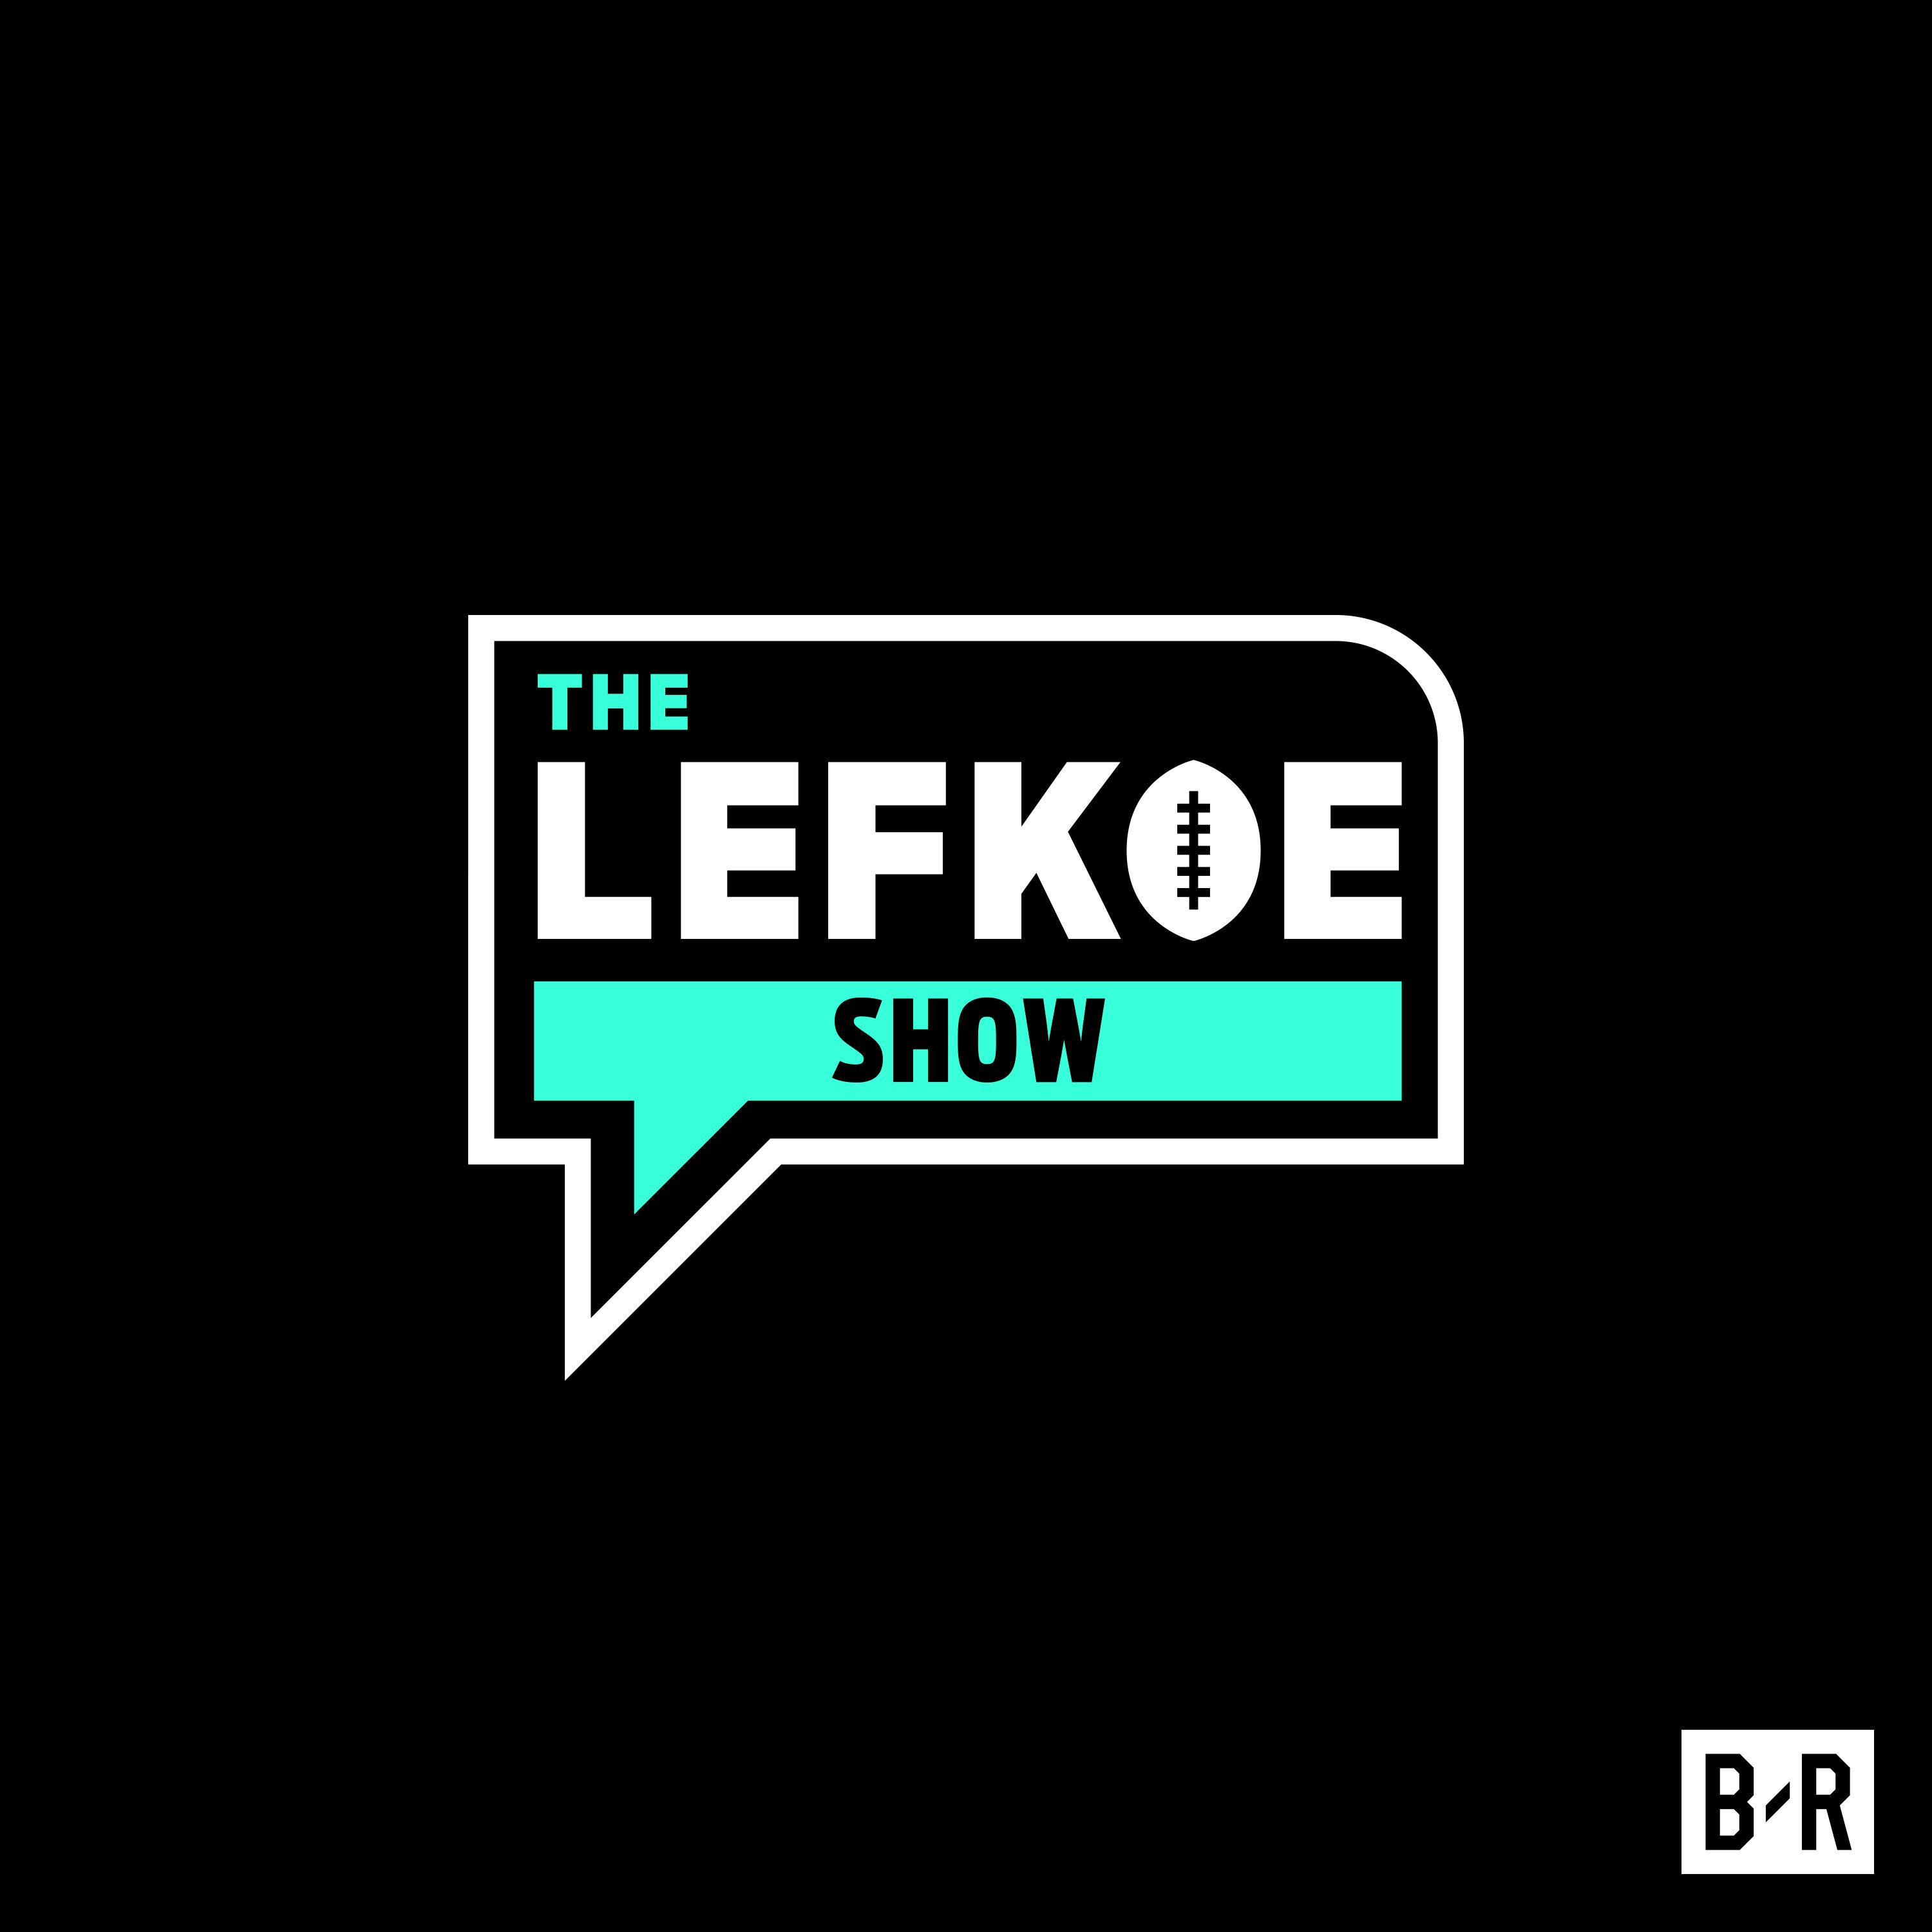 Ja Rule Talks About Quarantine Life, His Famous Bucks Appearance, and More | The Lefkoe Show